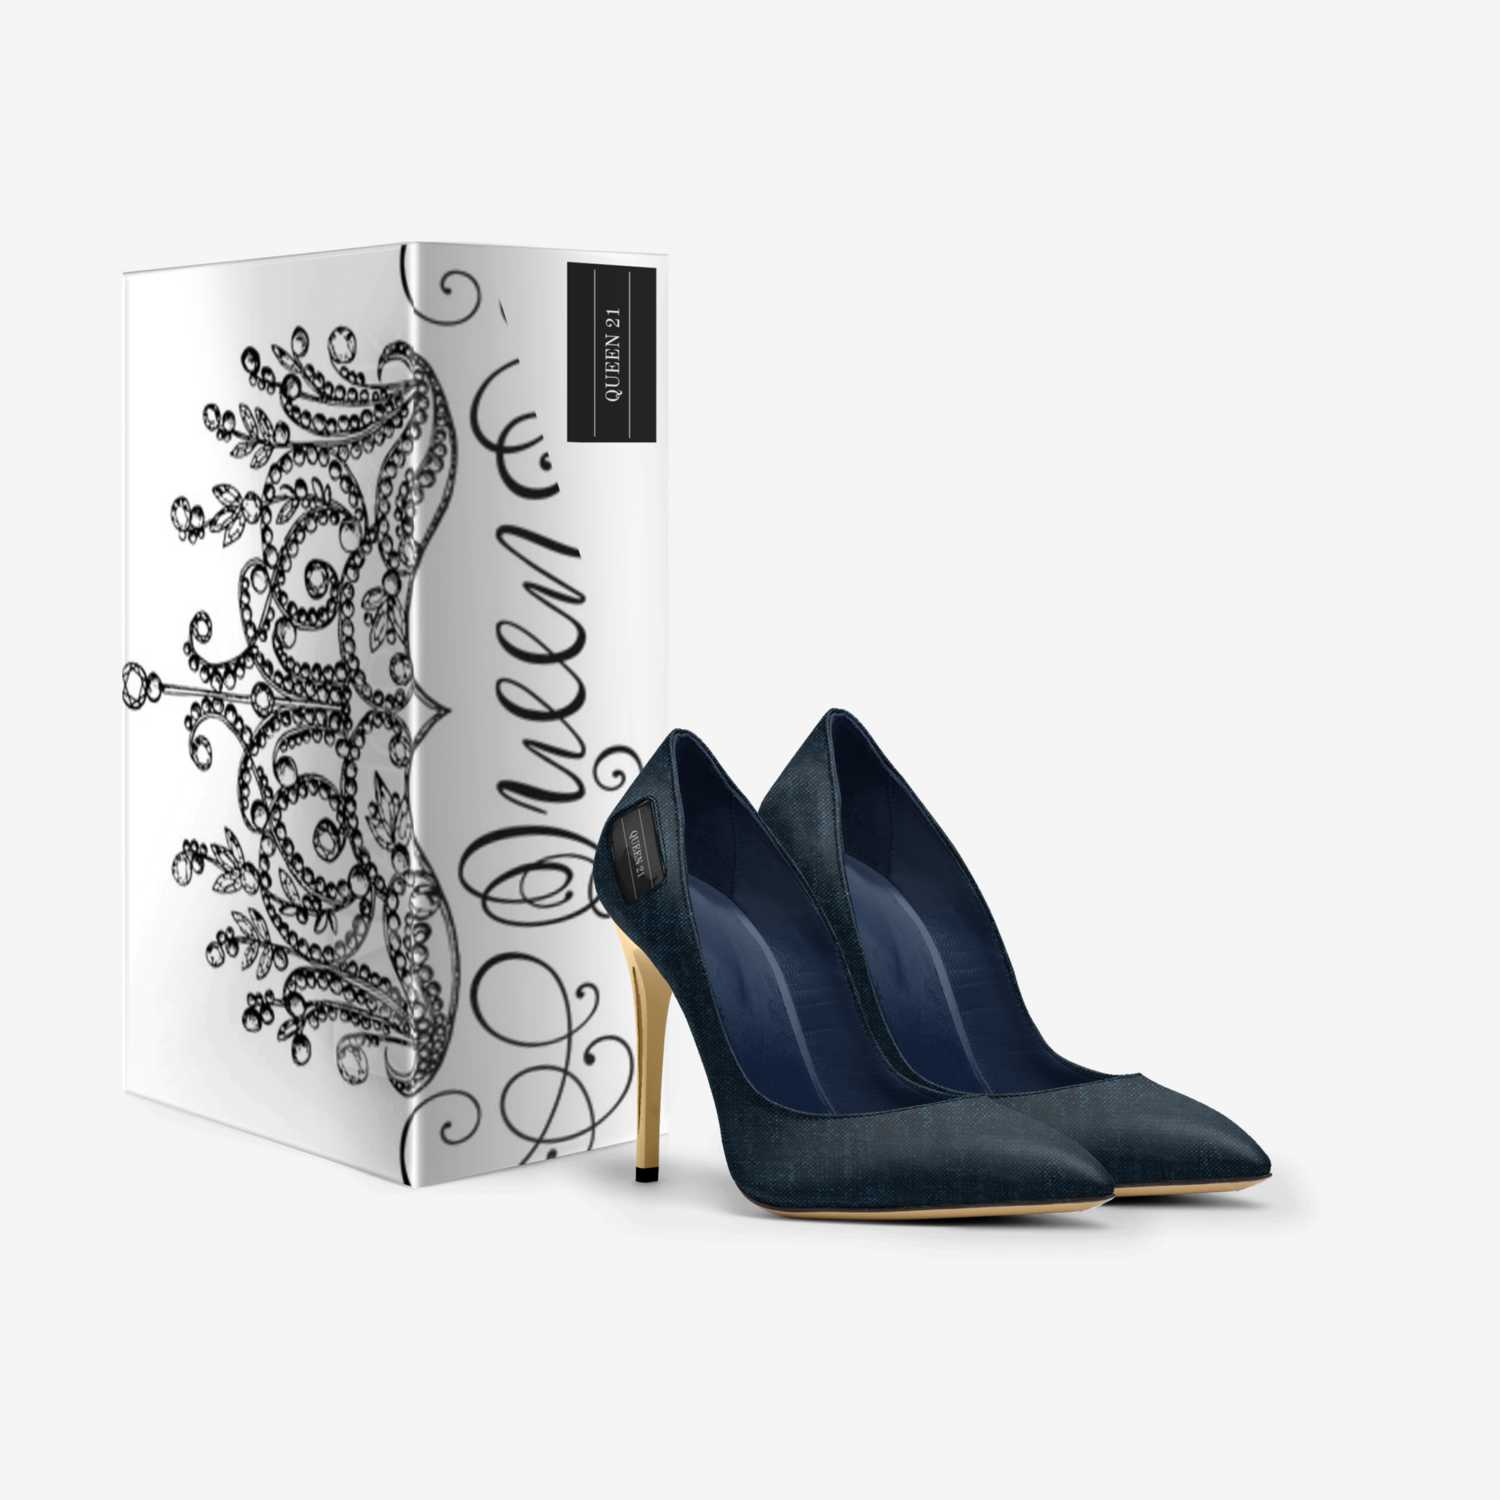 QUEEN 21 custom made in Italy shoes by Bena Klier | Box view